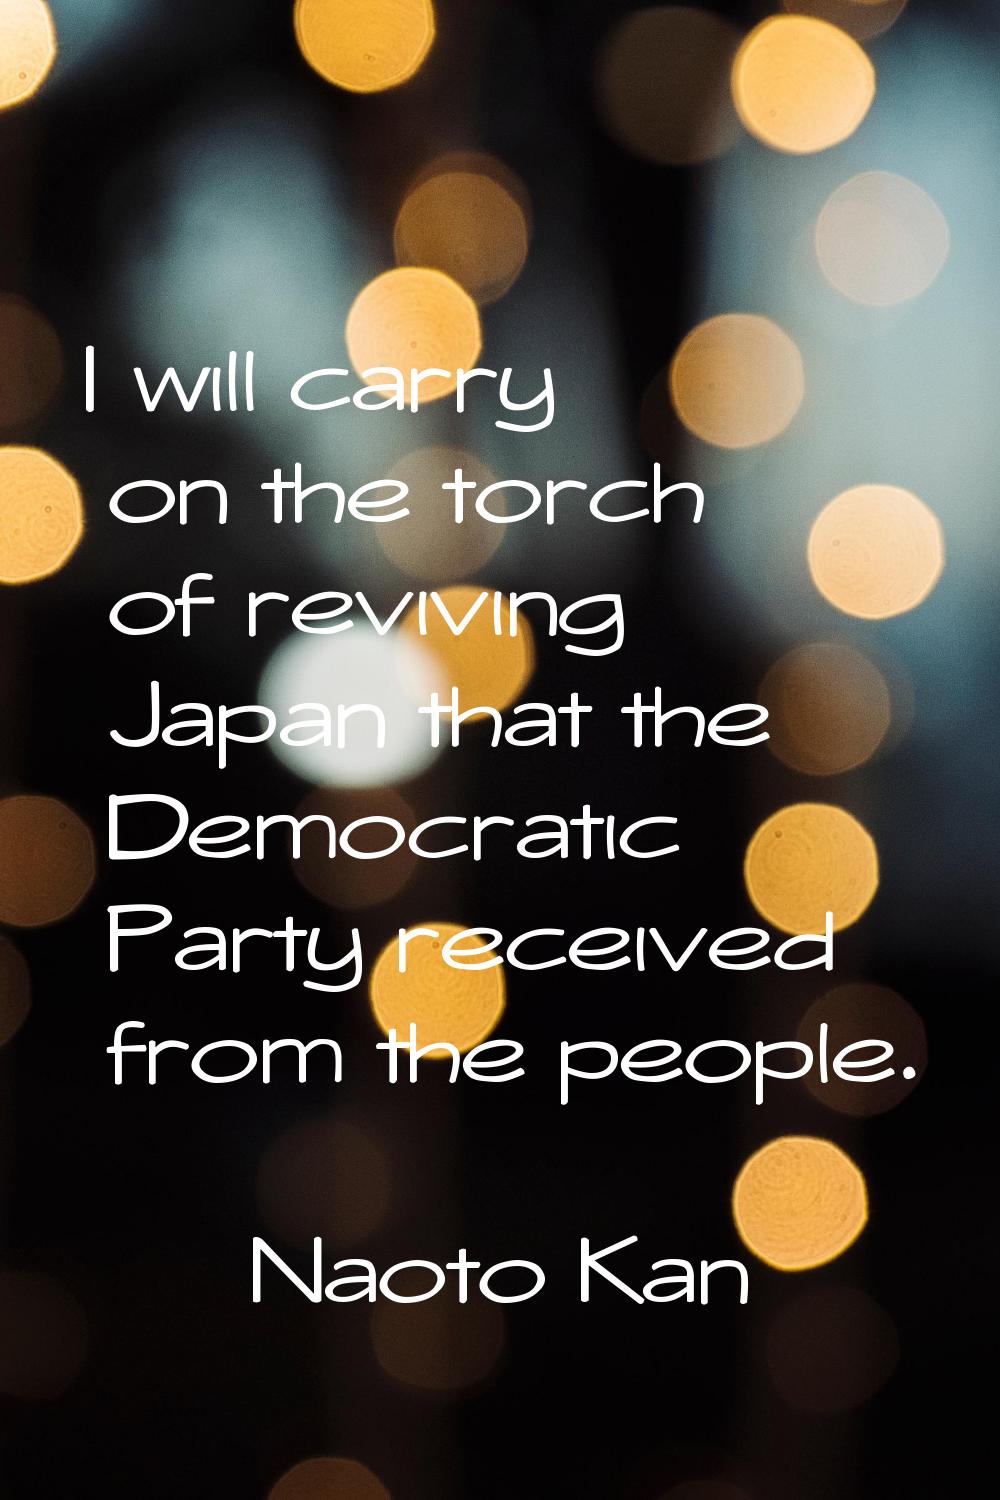 I will carry on the torch of reviving Japan that the Democratic Party received from the people.